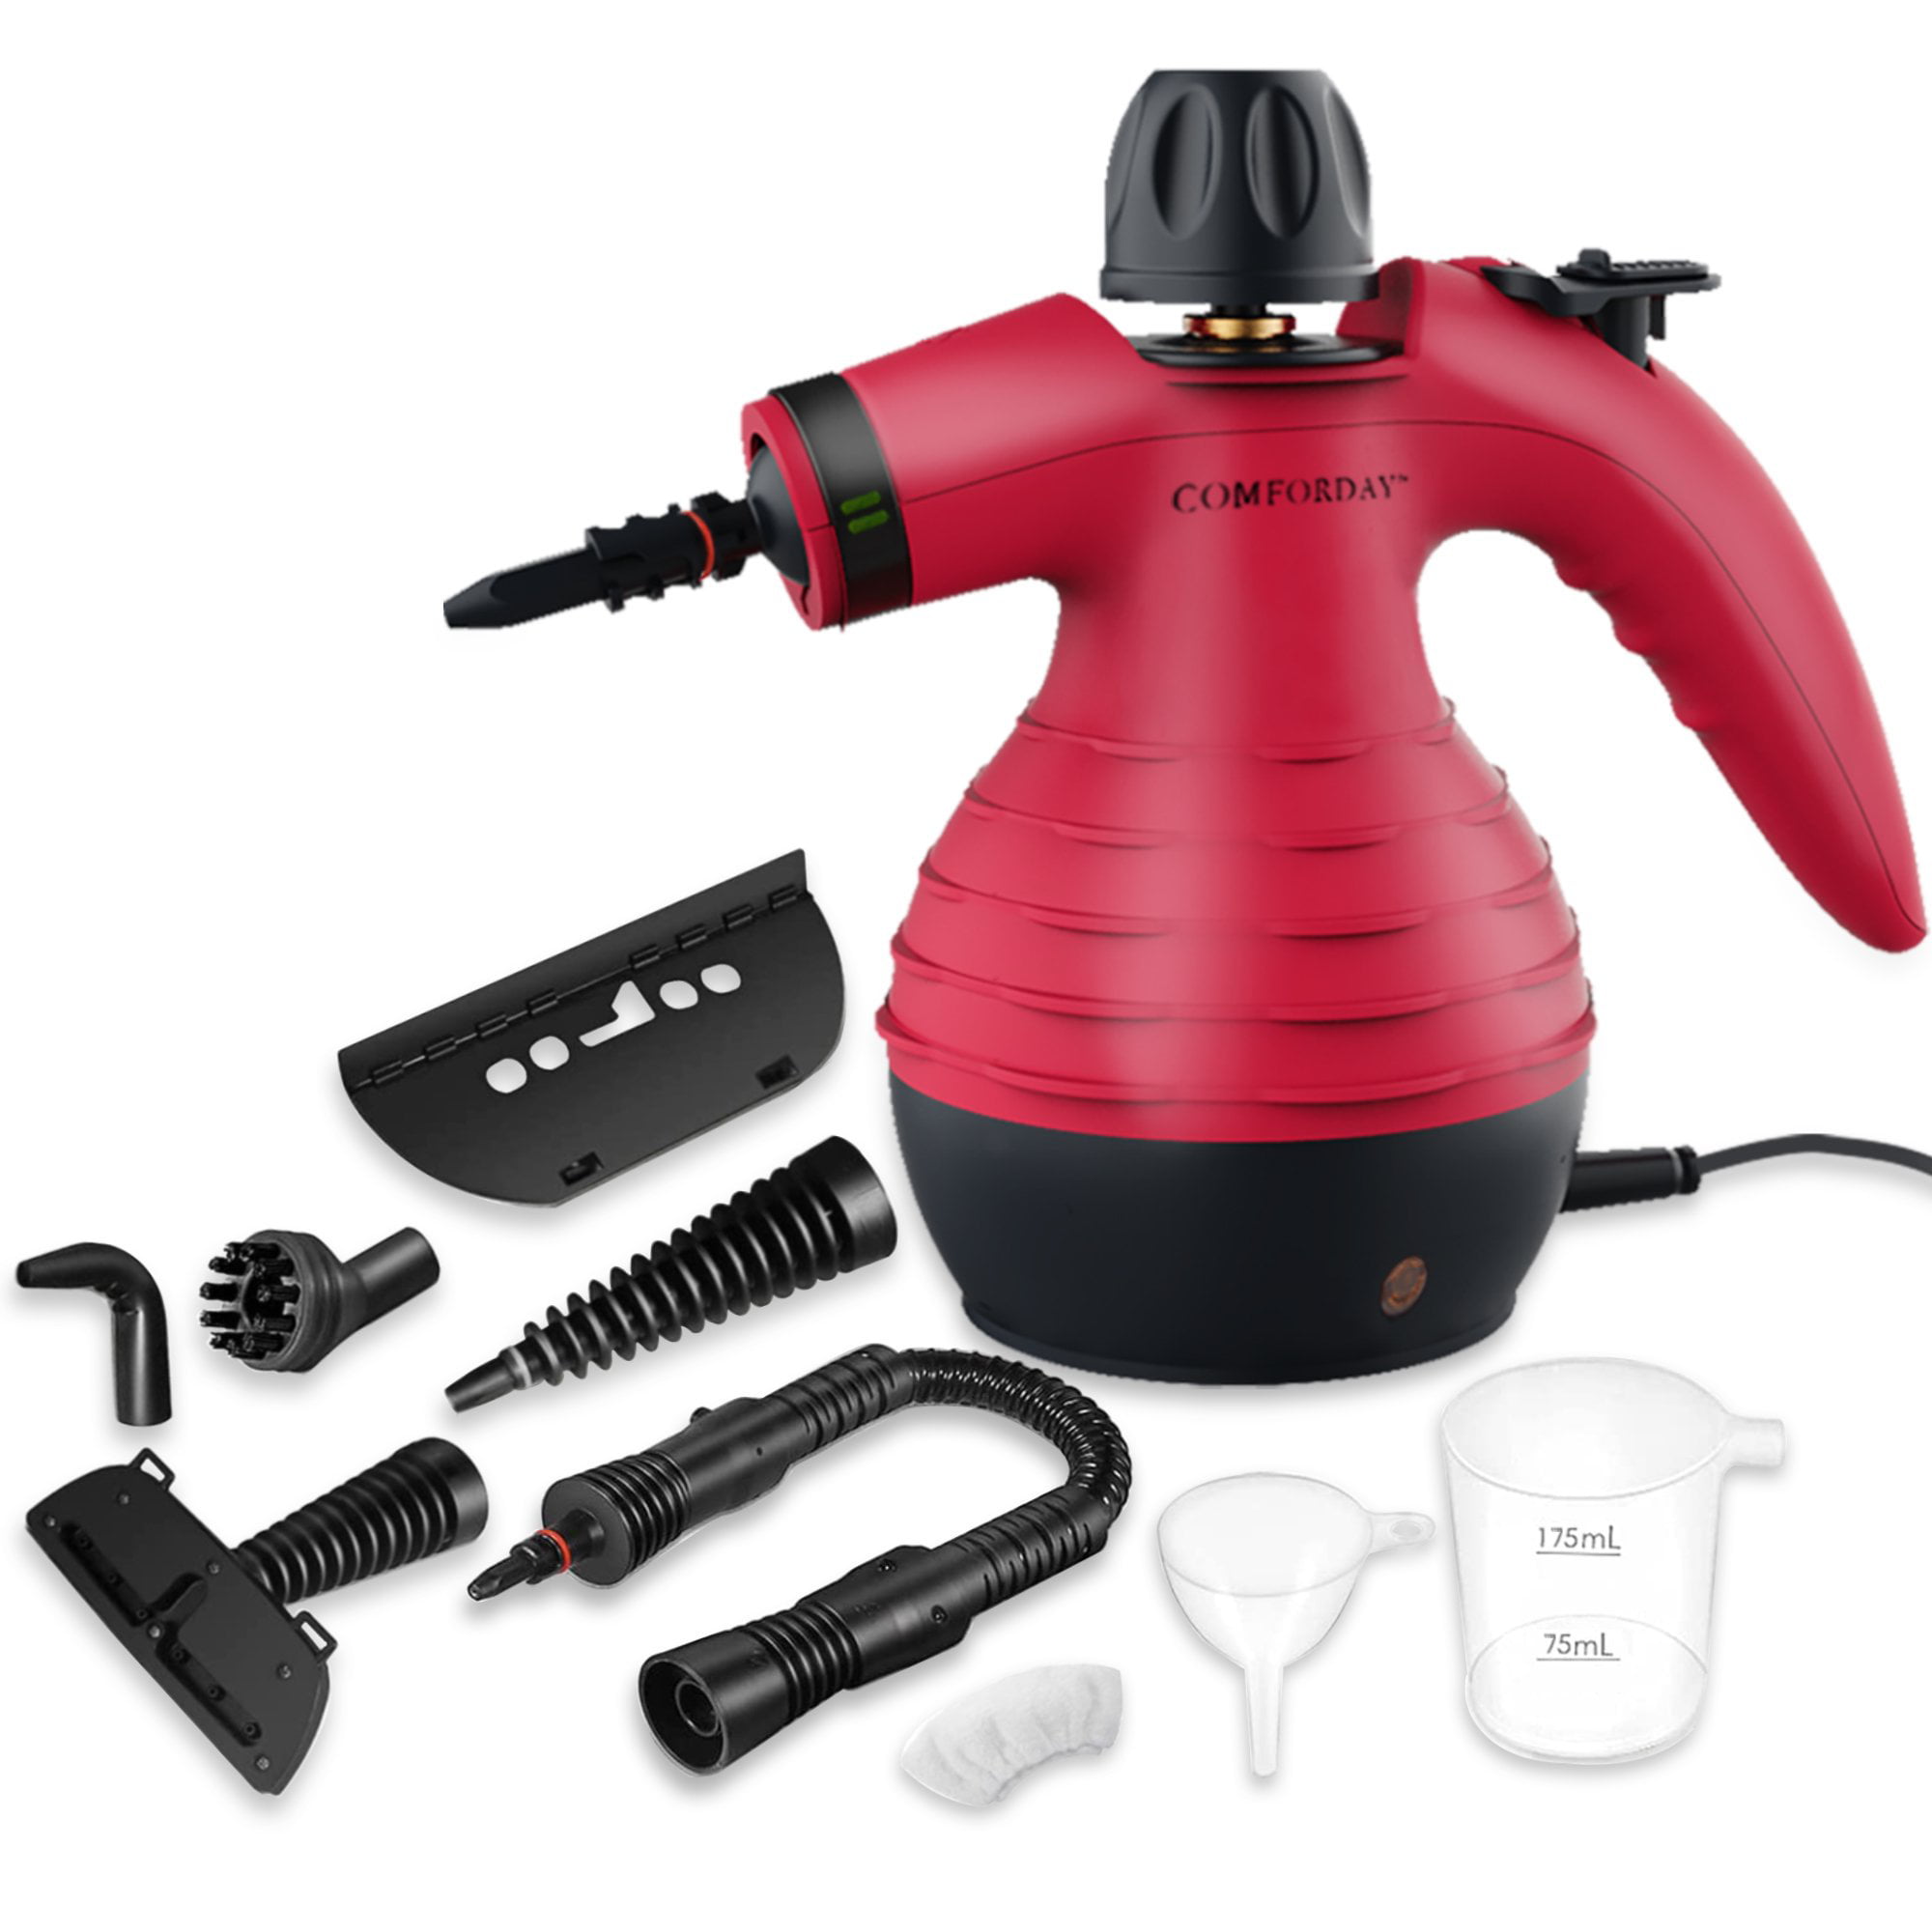 Indoor or Car Use Multi-functional Handheld Steam Cleaner with Accessories 